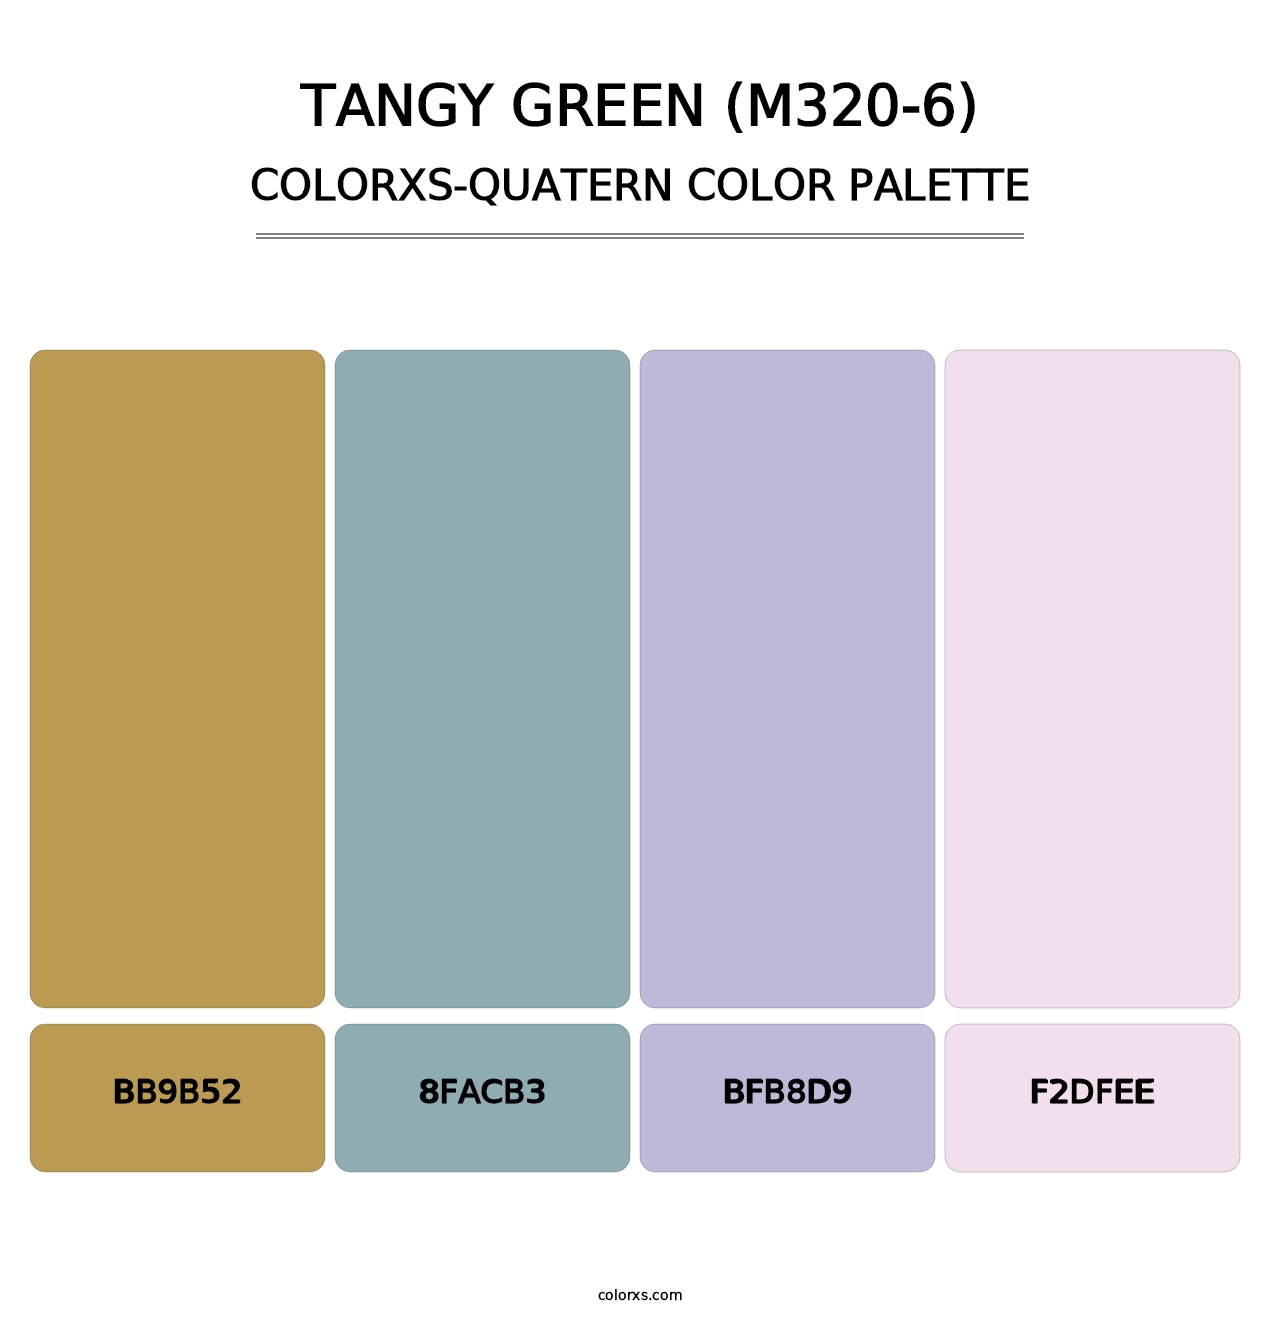 Tangy Green (M320-6) - Colorxs Quatern Palette